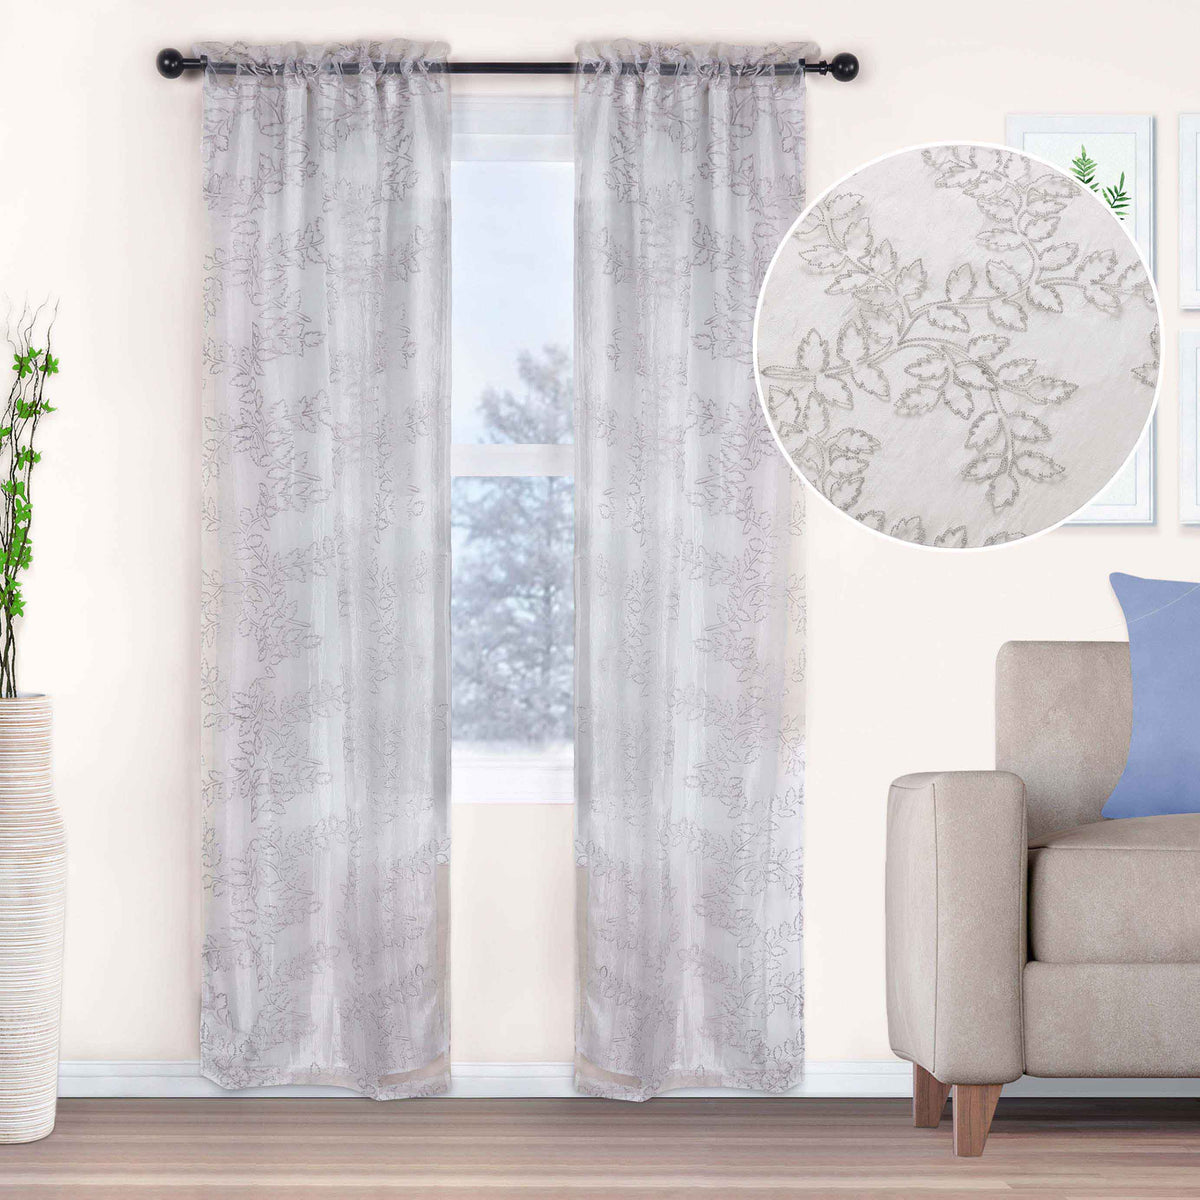 Embroidered Leaves Grommet 2 Piece Layered Sheer Curtain Panel Set - Gray